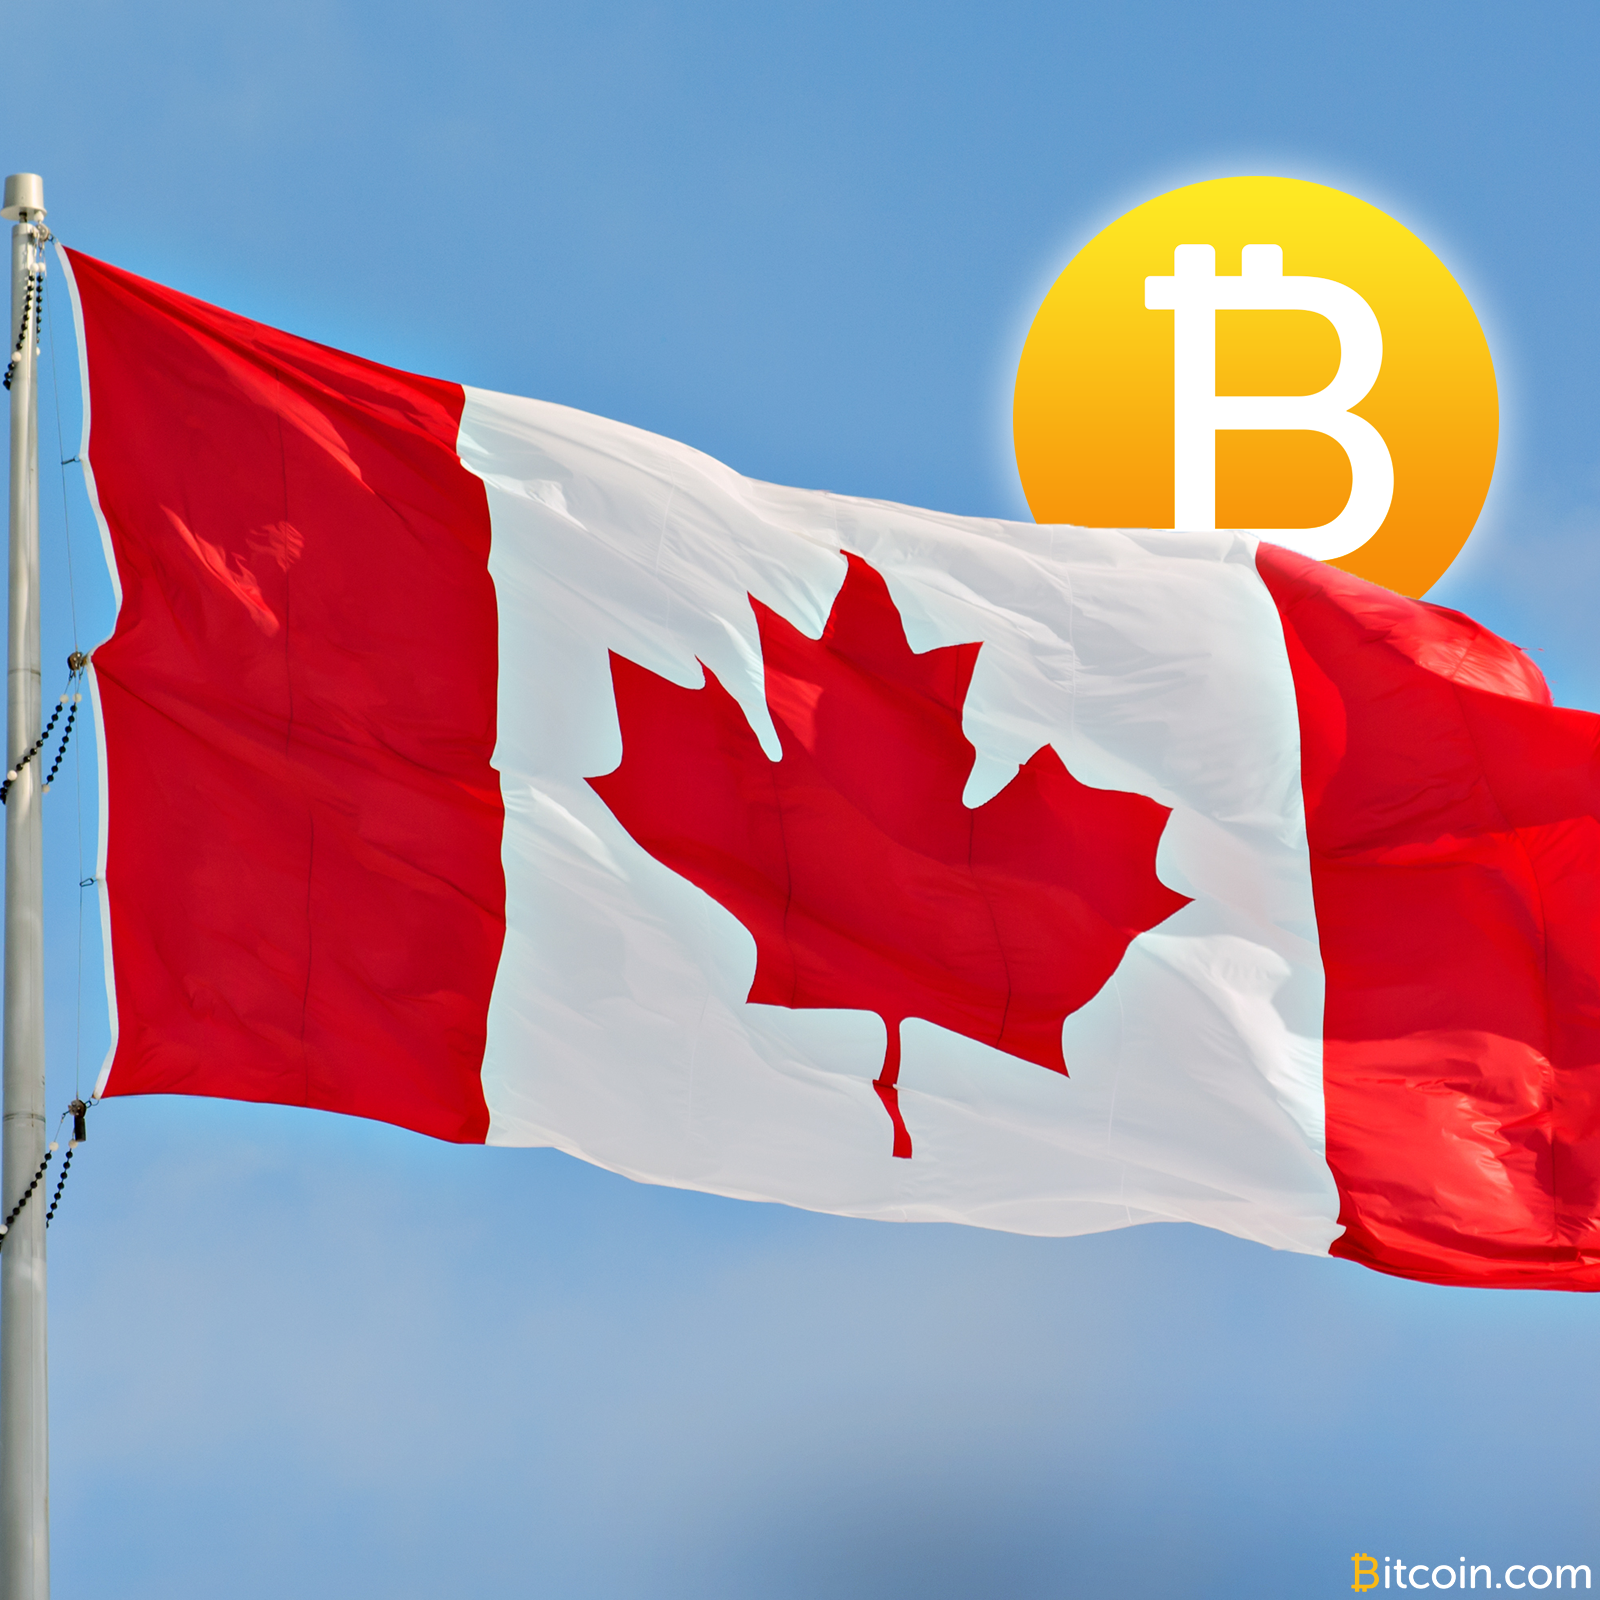 ICOs May Be Subject to Securities Laws in Canada